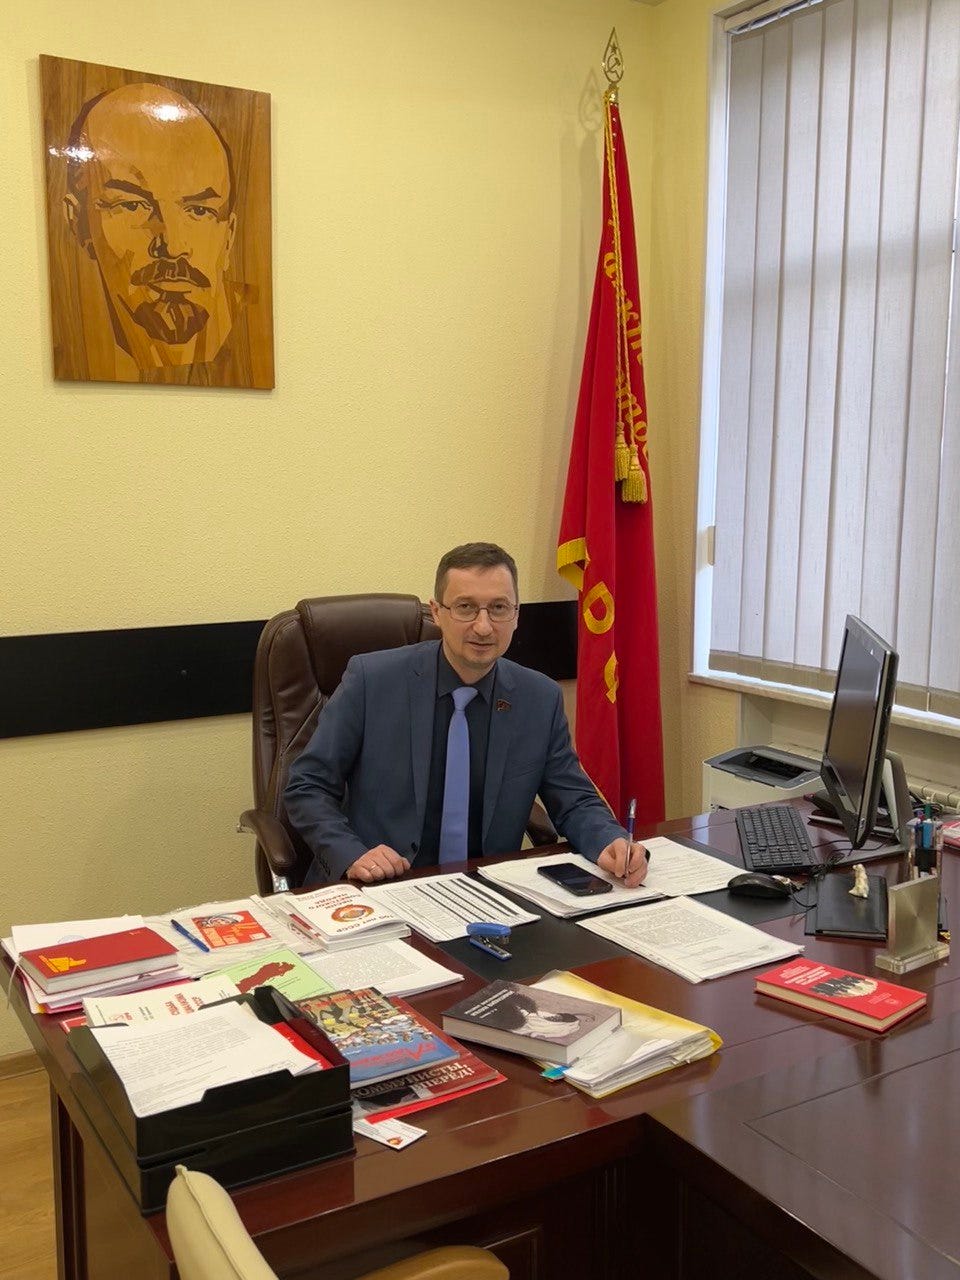 At the KPRF office in Saint Petersburg sits Roman Kononenko, a member of the Presidium of the Central Committee of Communist Party of the Russian Federation (KPRF) and First Secretary of the Saint Petersburg City Committee of the KPRF / credit: Fergie Chambers